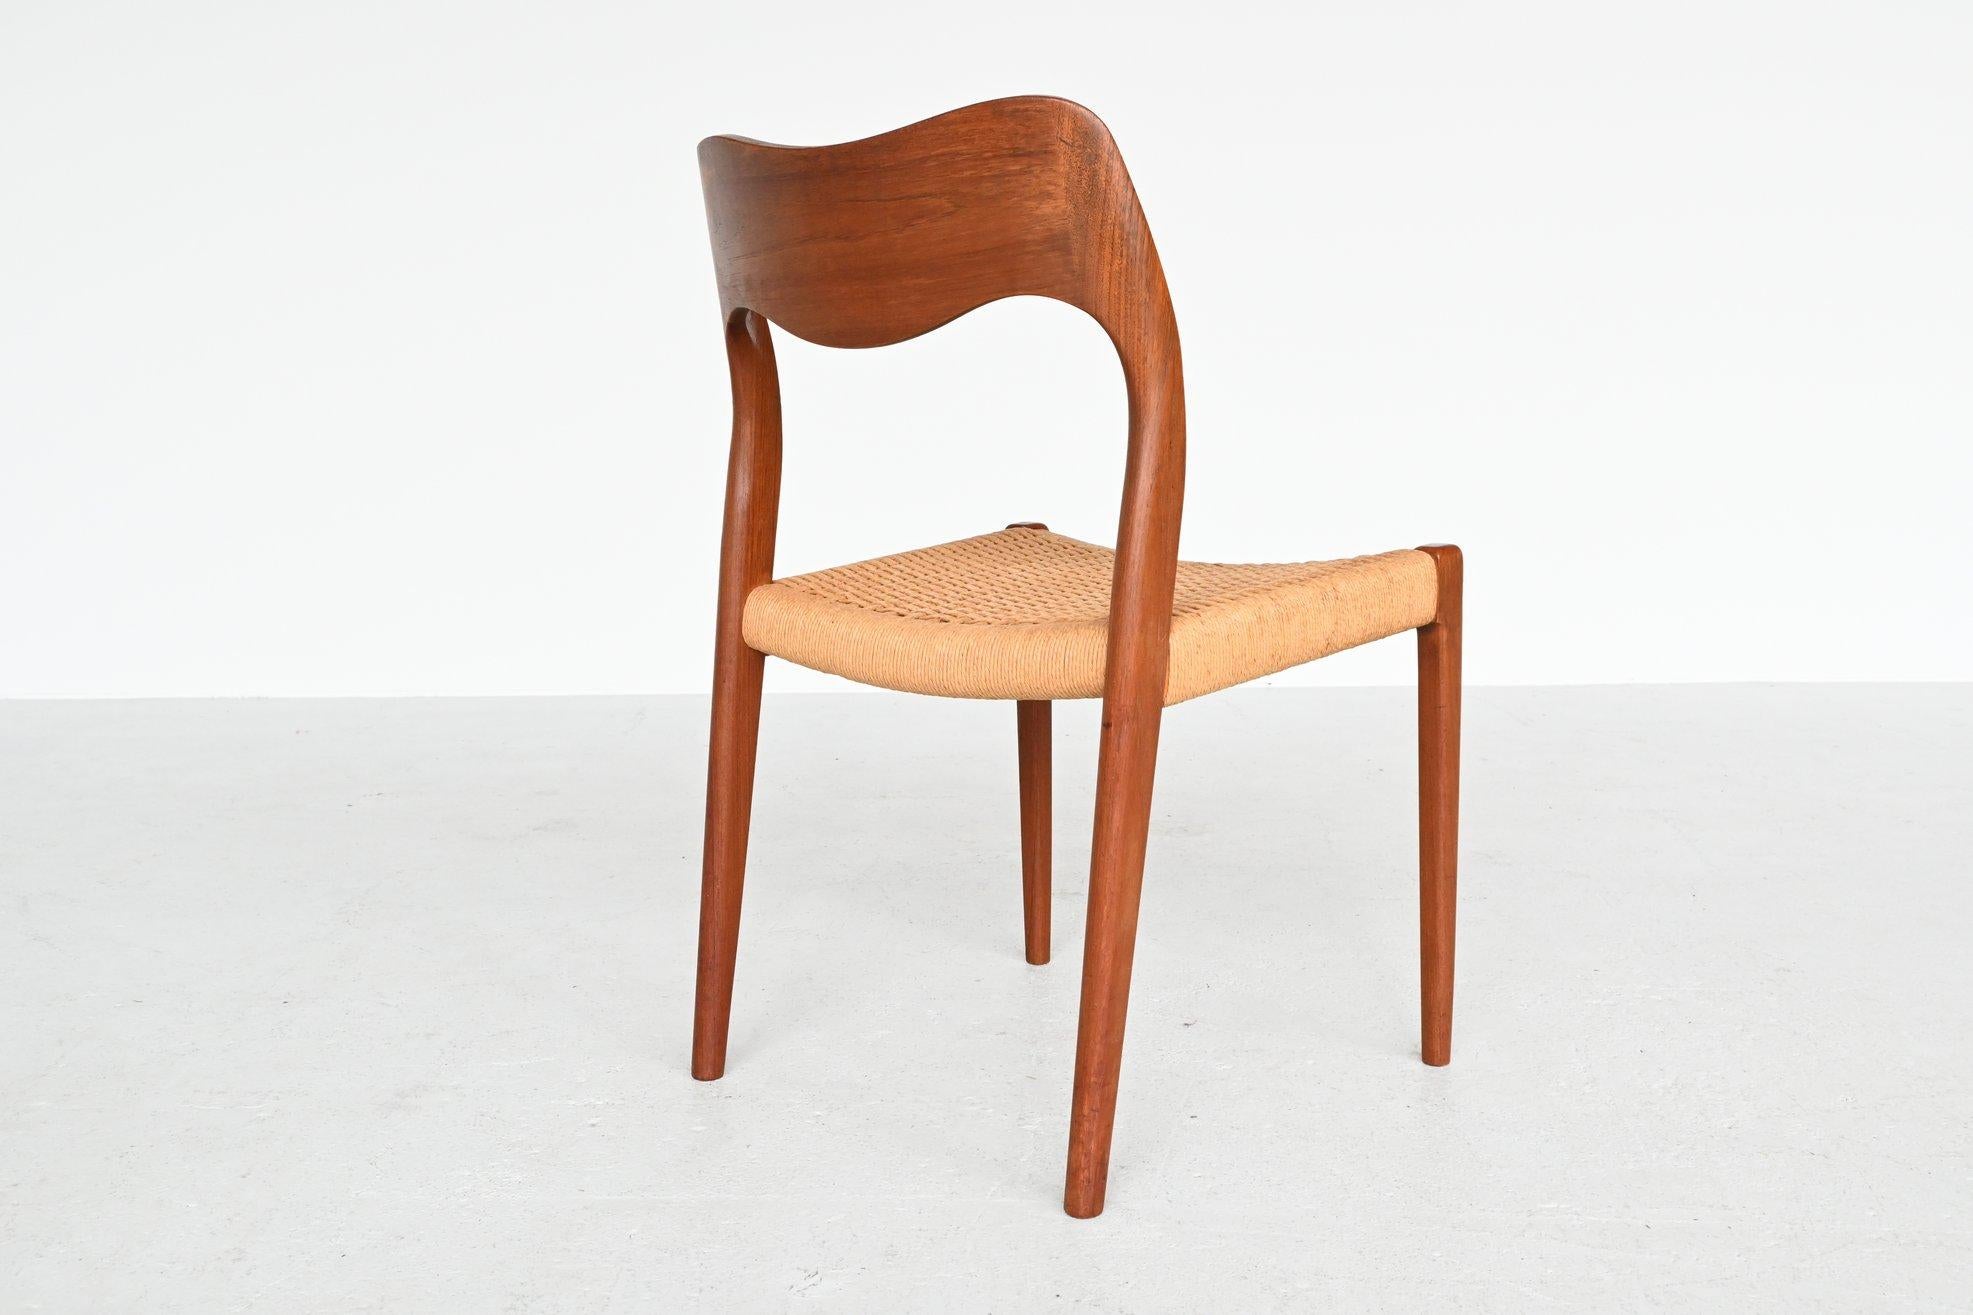 Papercord Niels Otto Moller Model 71 Teak Paper Cord Dining Chairs, Denmark, 1960